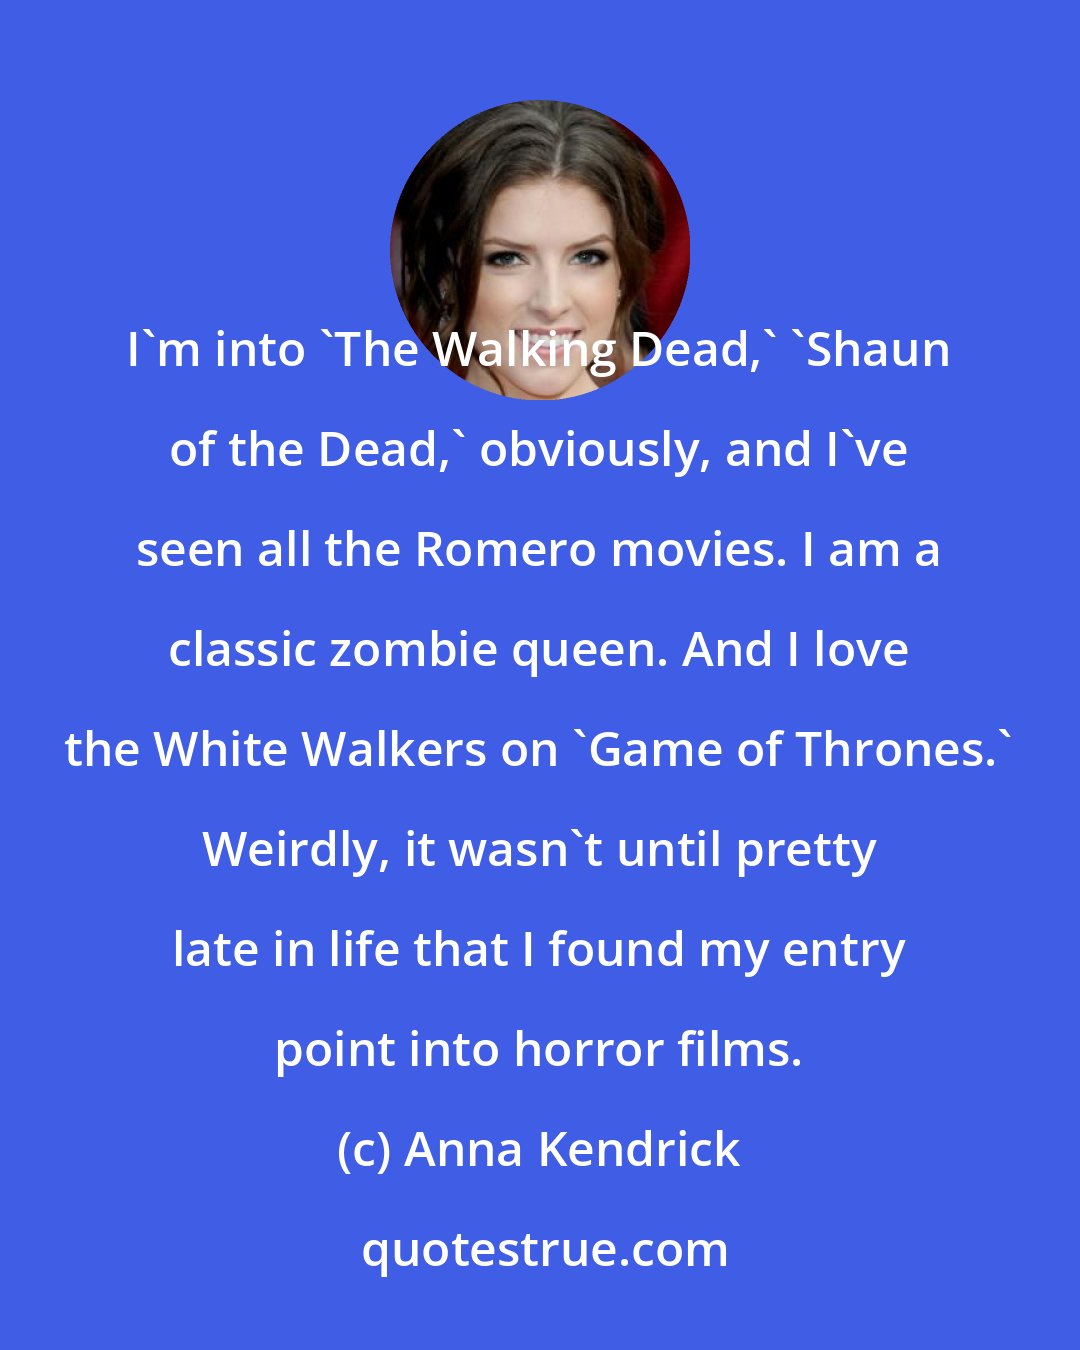 Anna Kendrick: I'm into 'The Walking Dead,' 'Shaun of the Dead,' obviously, and I've seen all the Romero movies. I am a classic zombie queen. And I love the White Walkers on 'Game of Thrones.' Weirdly, it wasn't until pretty late in life that I found my entry point into horror films.